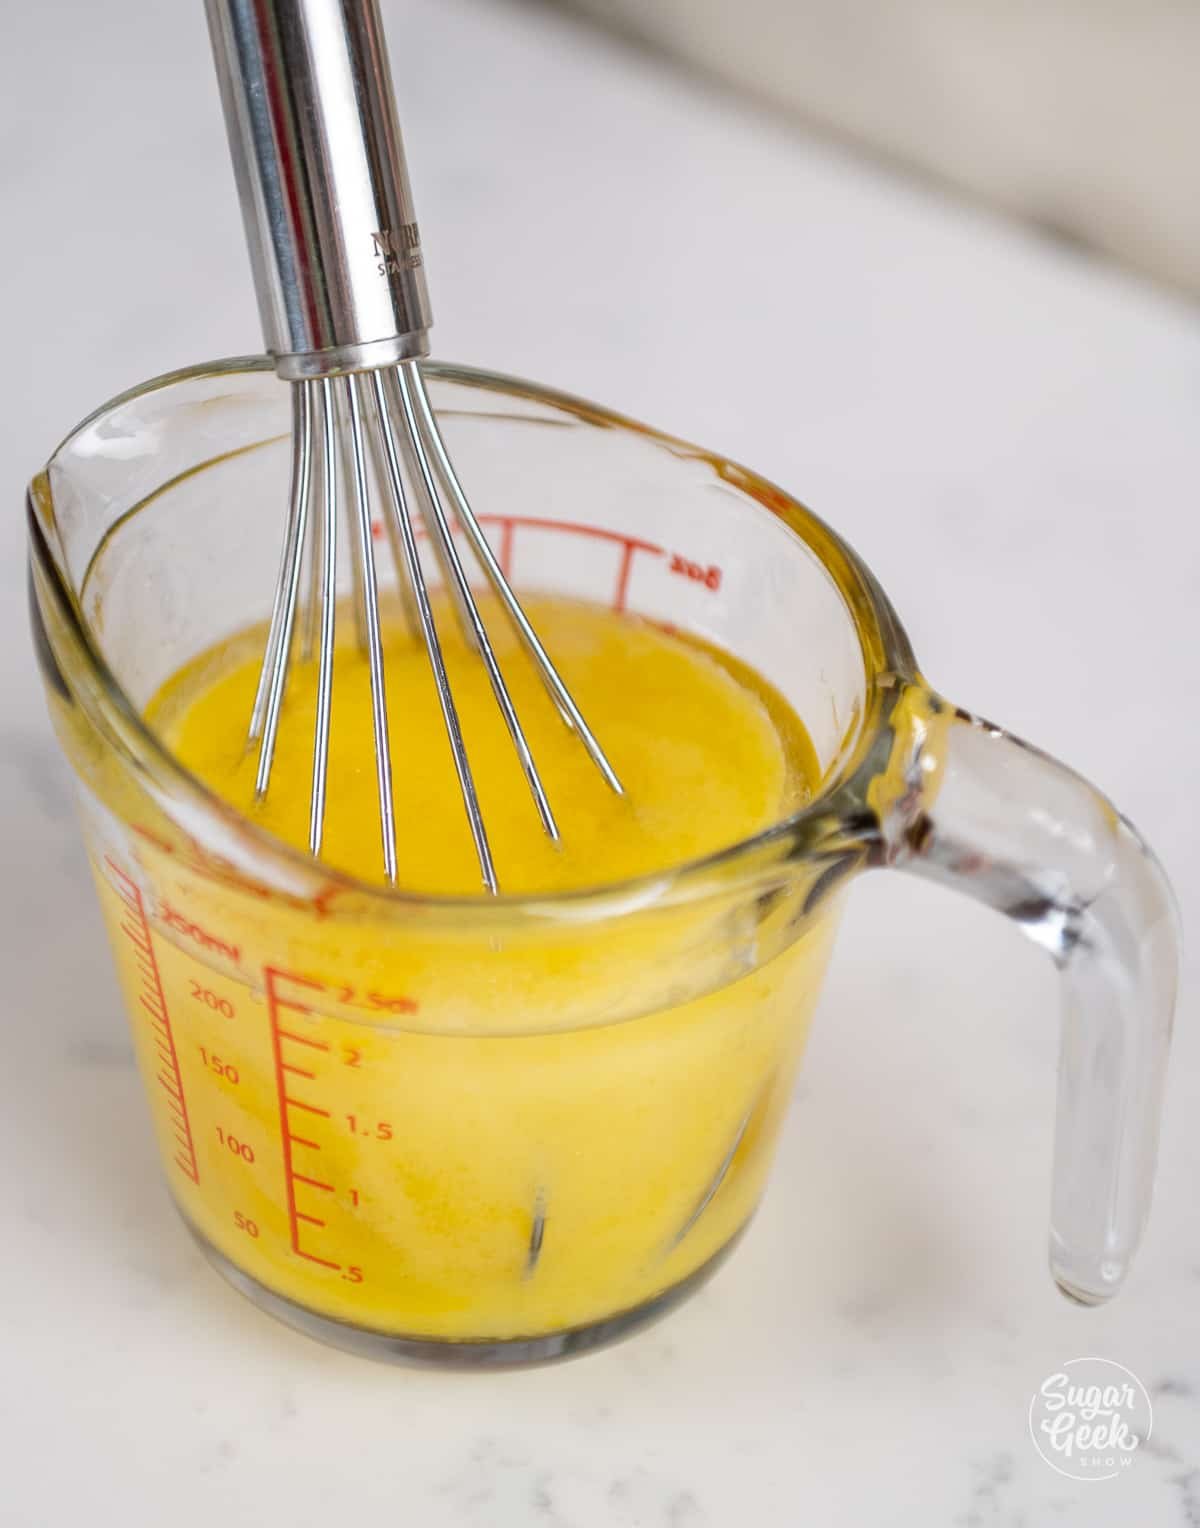 whisking eggs and oil together in a measuring cup.